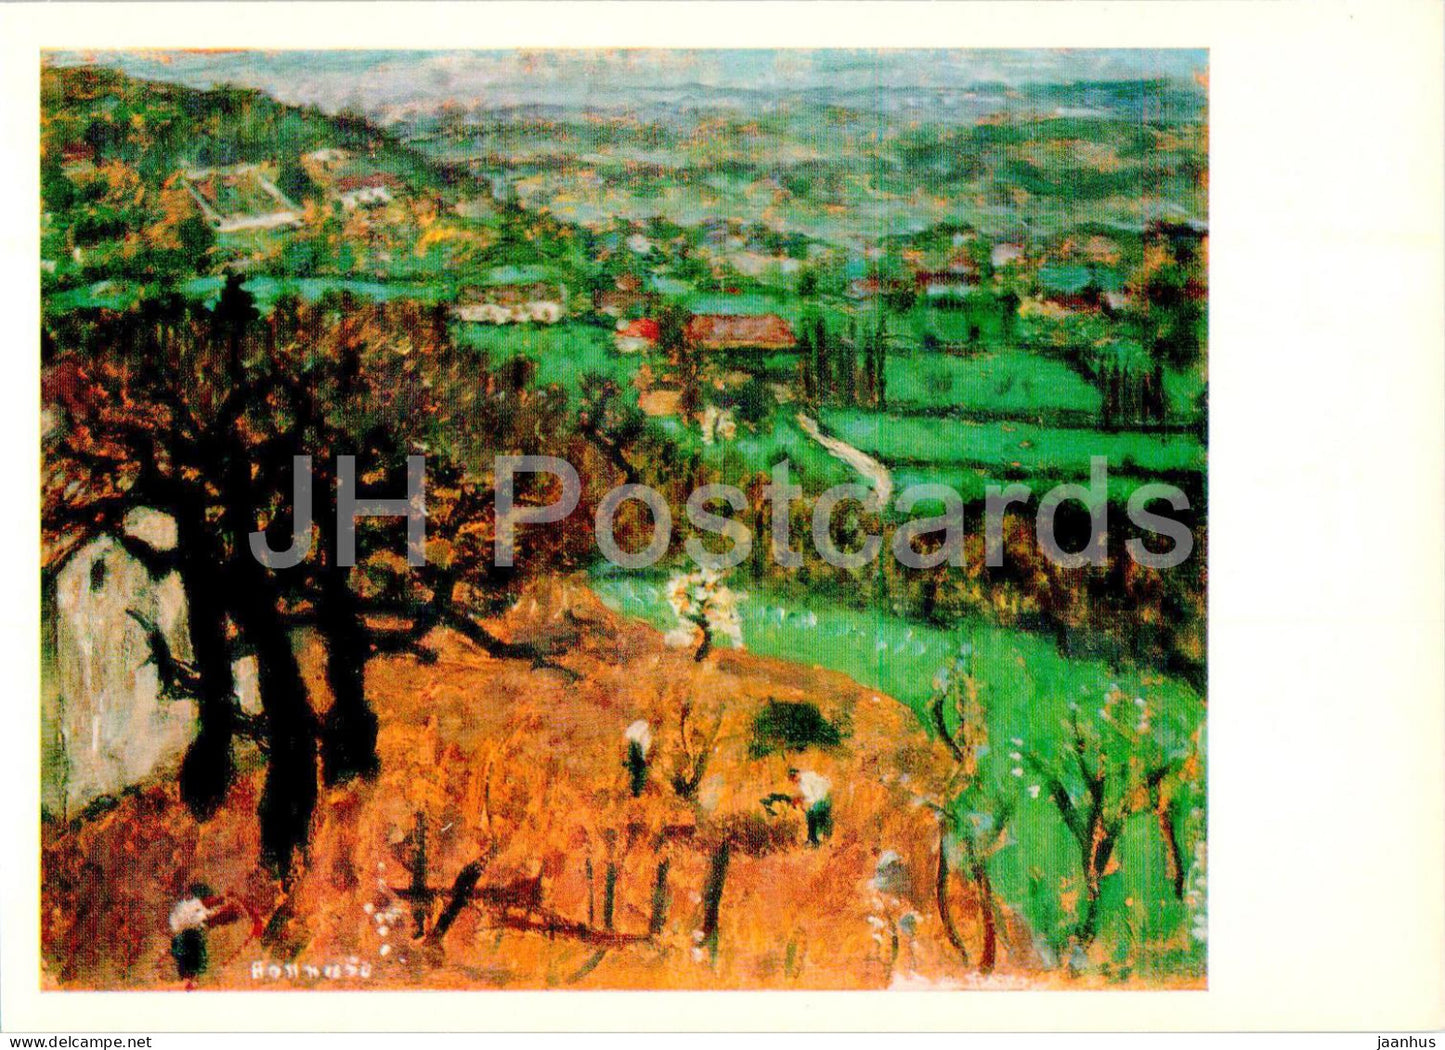 painting by Pierre Bonnard - Paysage in Dauphine - French art - 1977 - Russia USSR - unused - JH Postcards